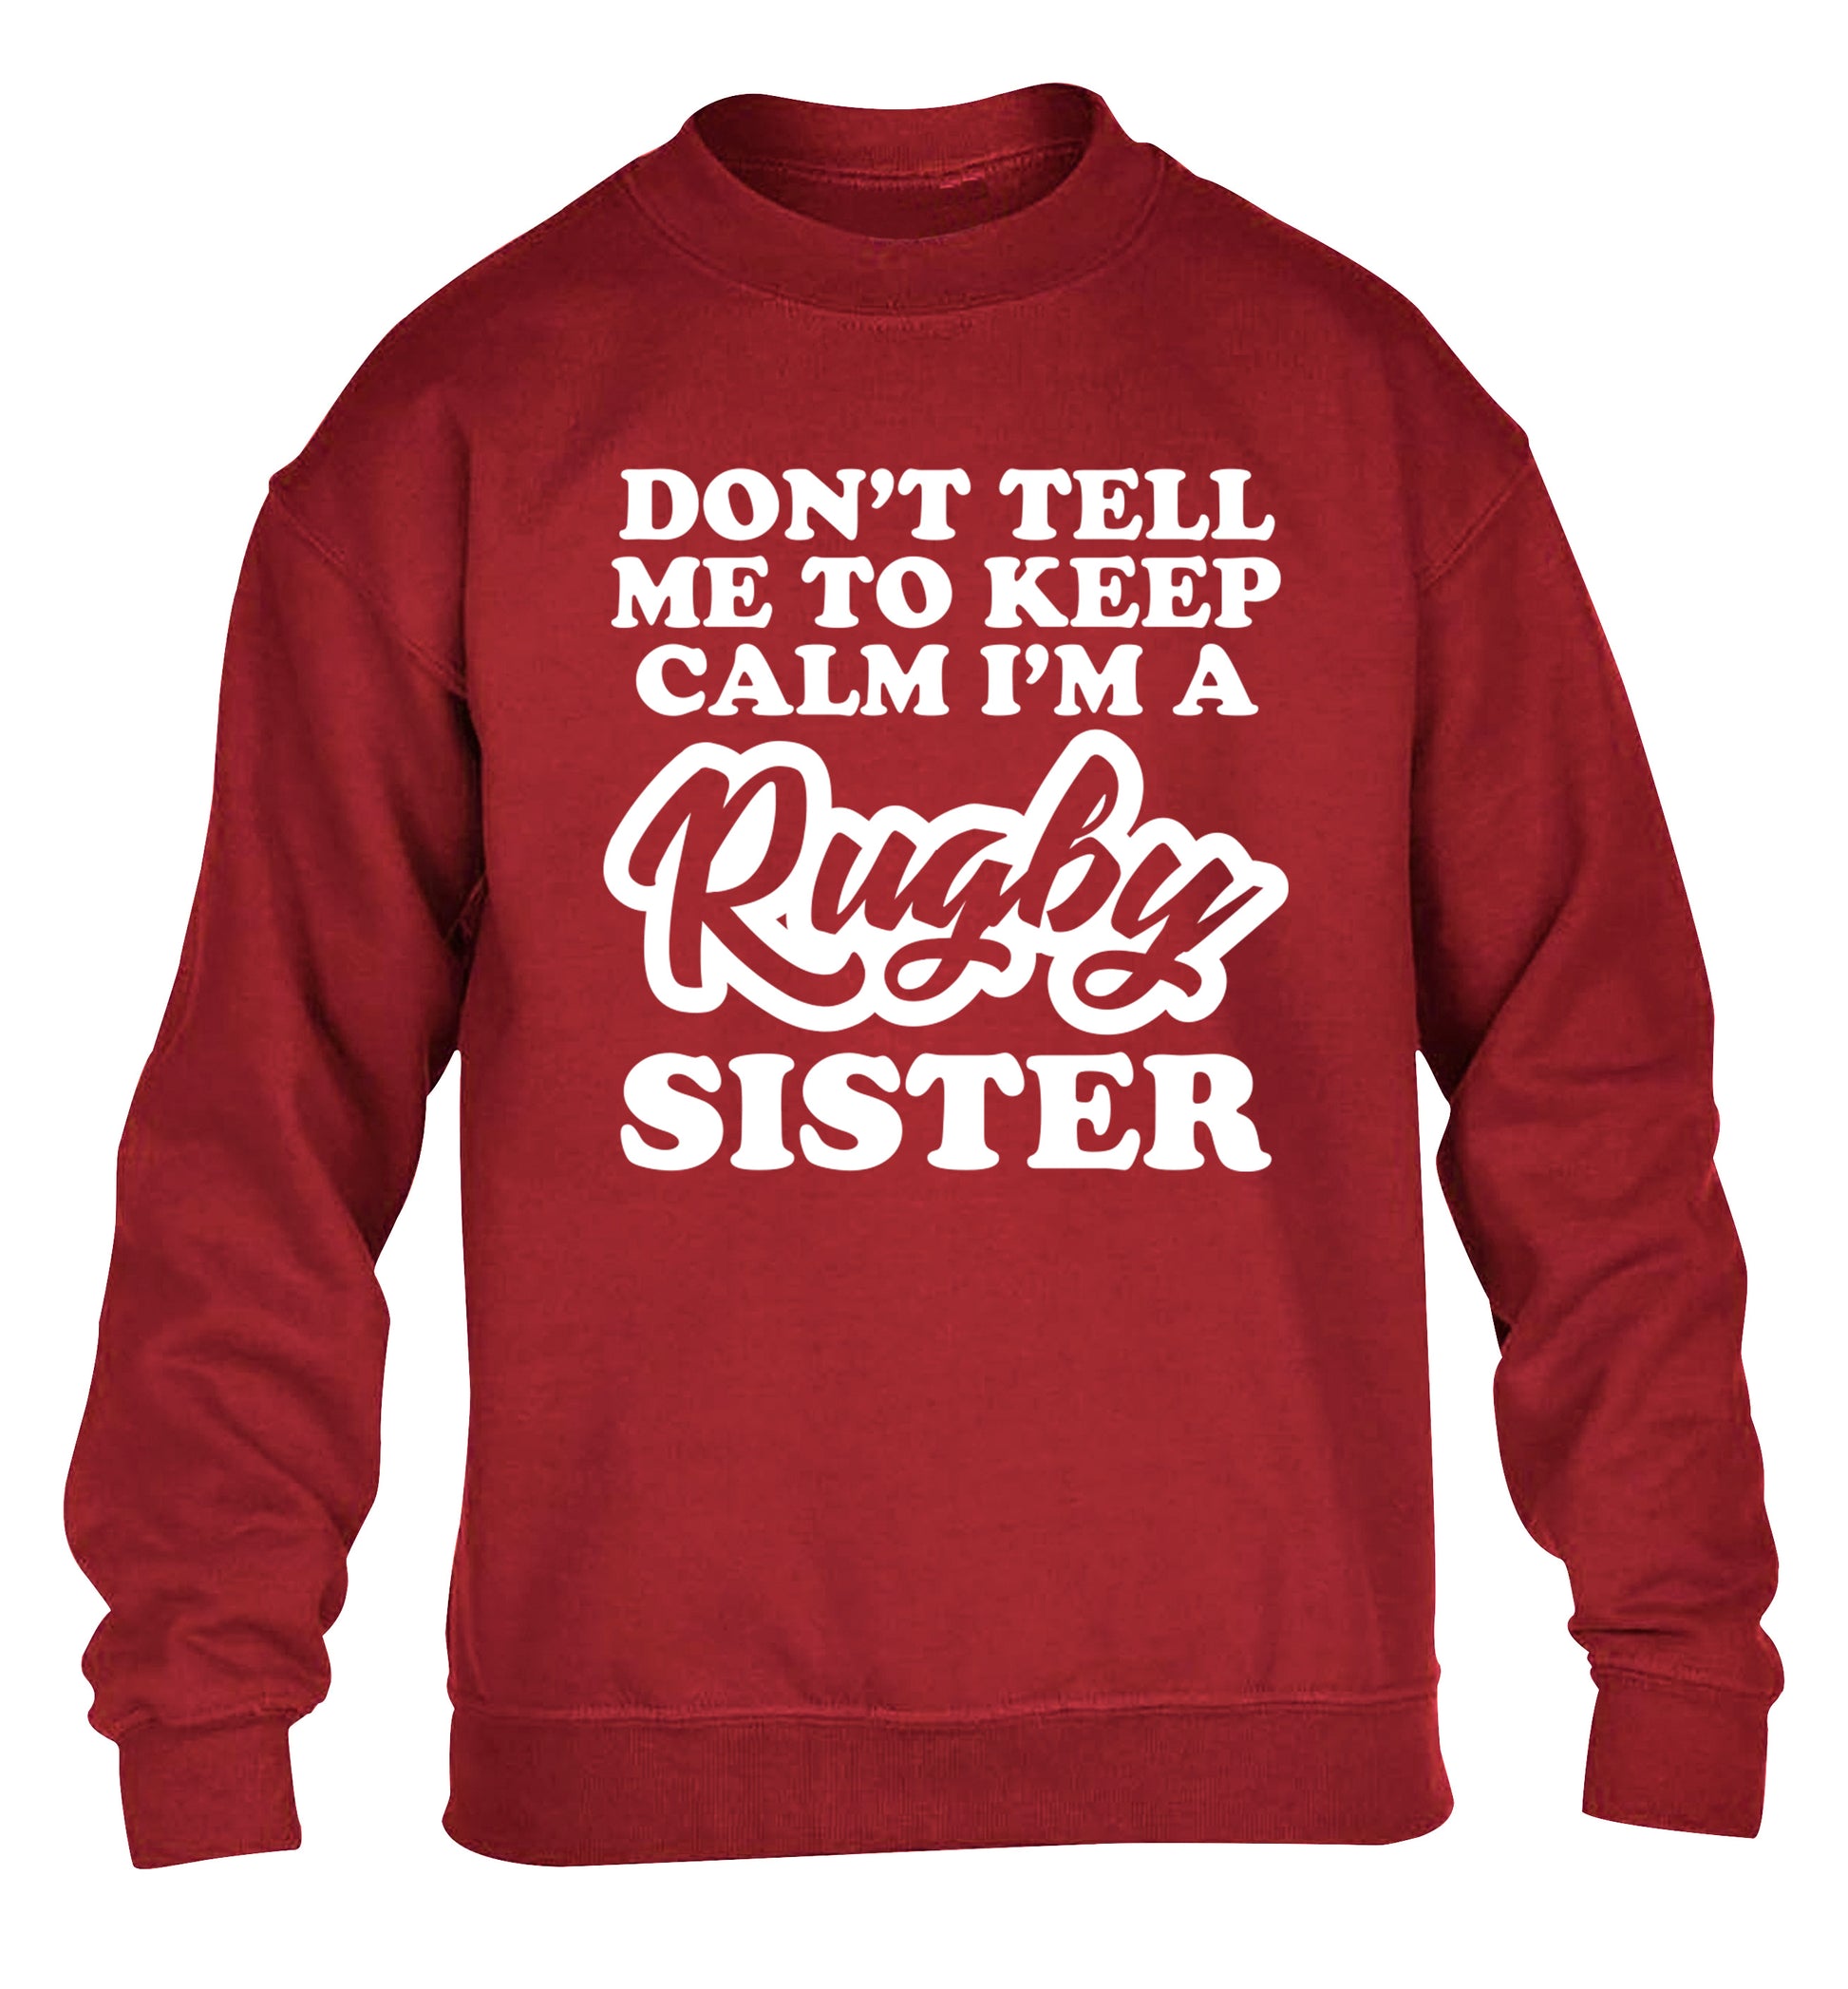 Don't tell me keep calm I'm a rugby sister children's grey sweater 12-13 Years